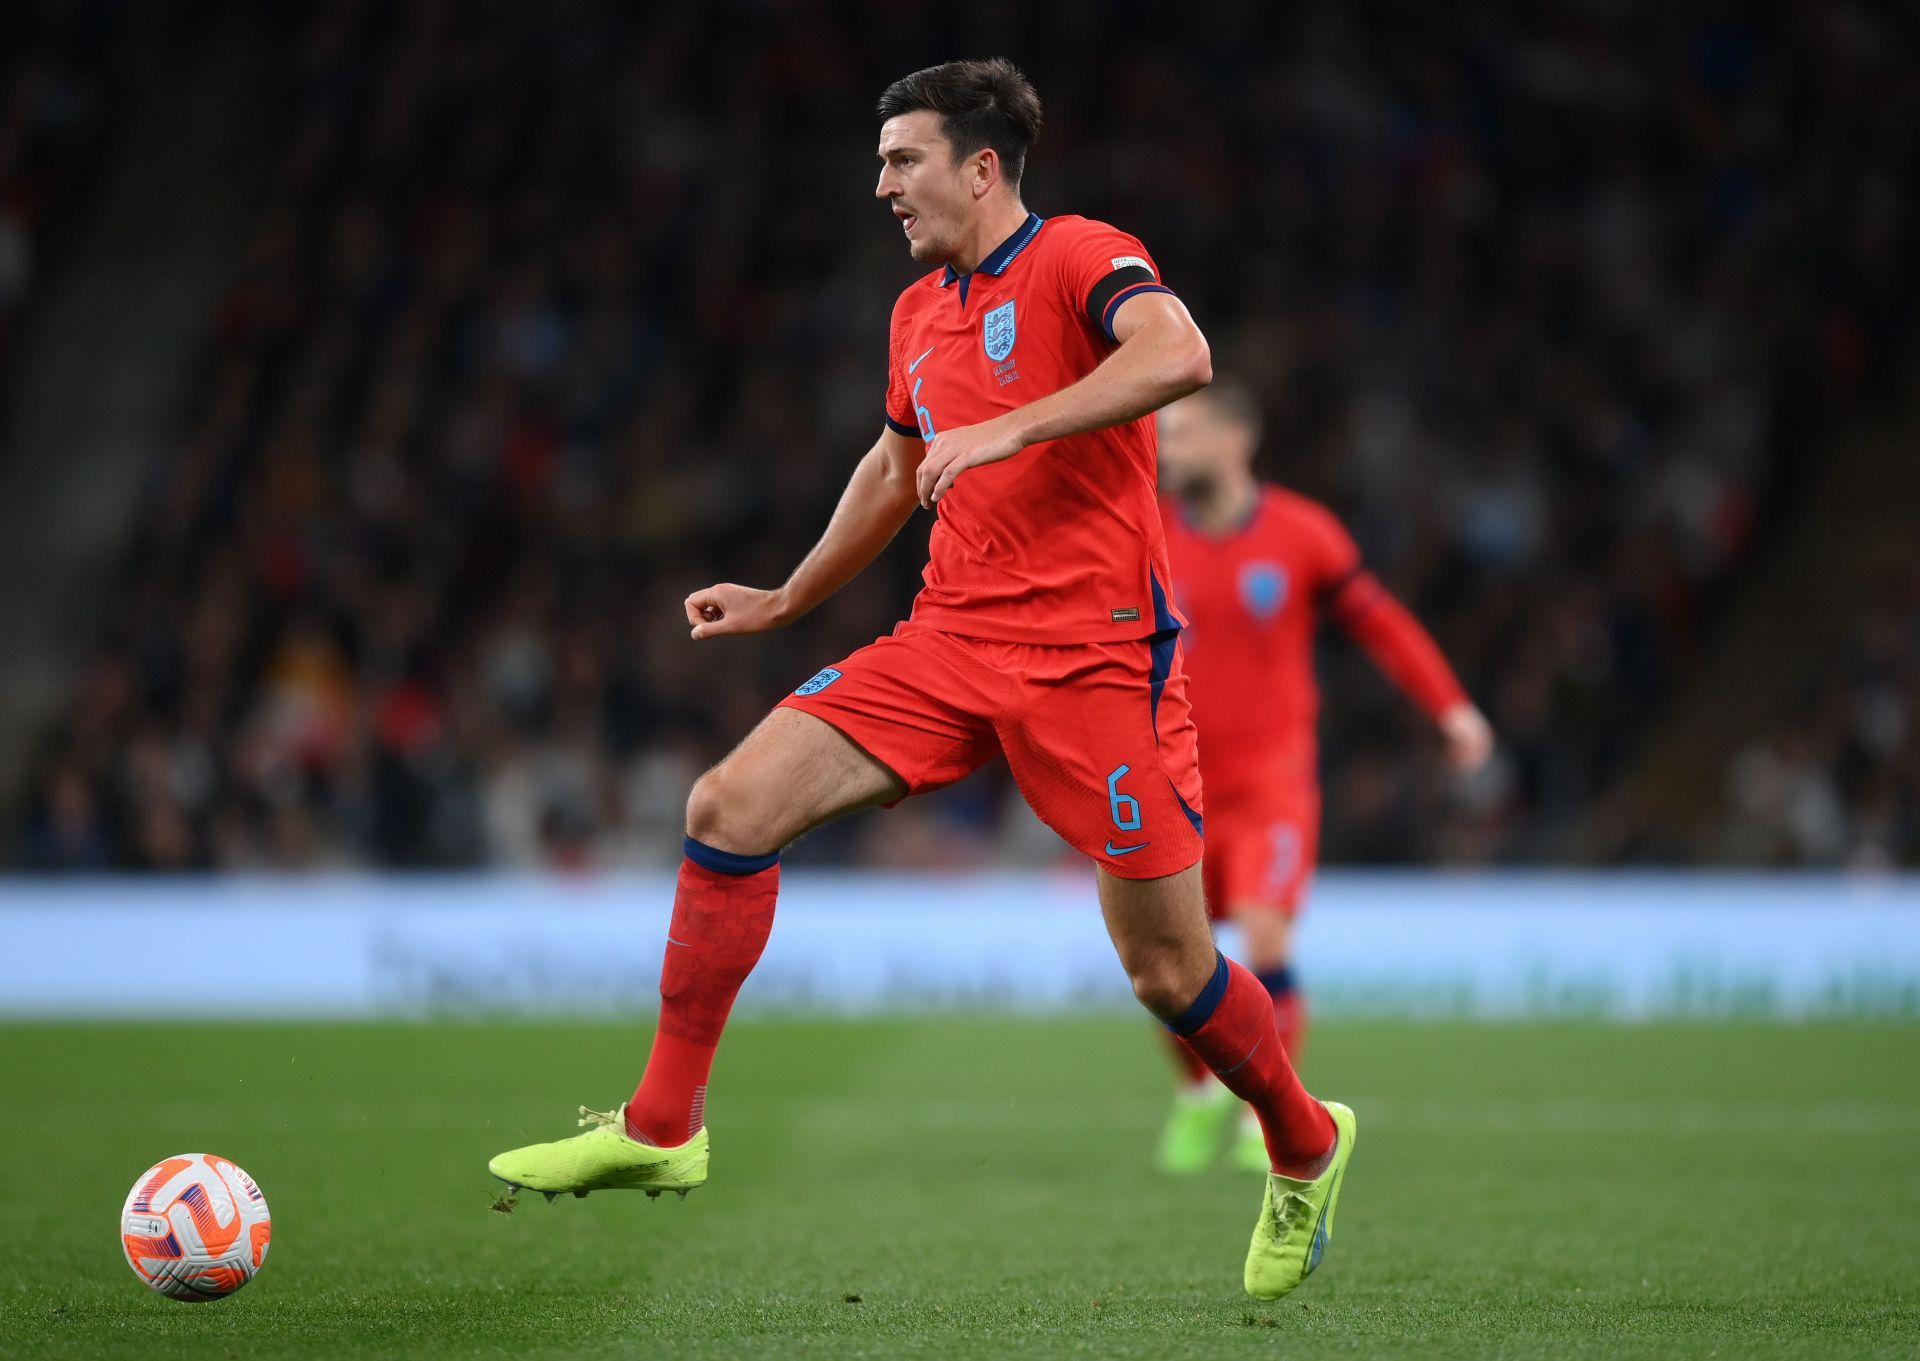 Harry Maguire has struggled to break into the starting eleven this season